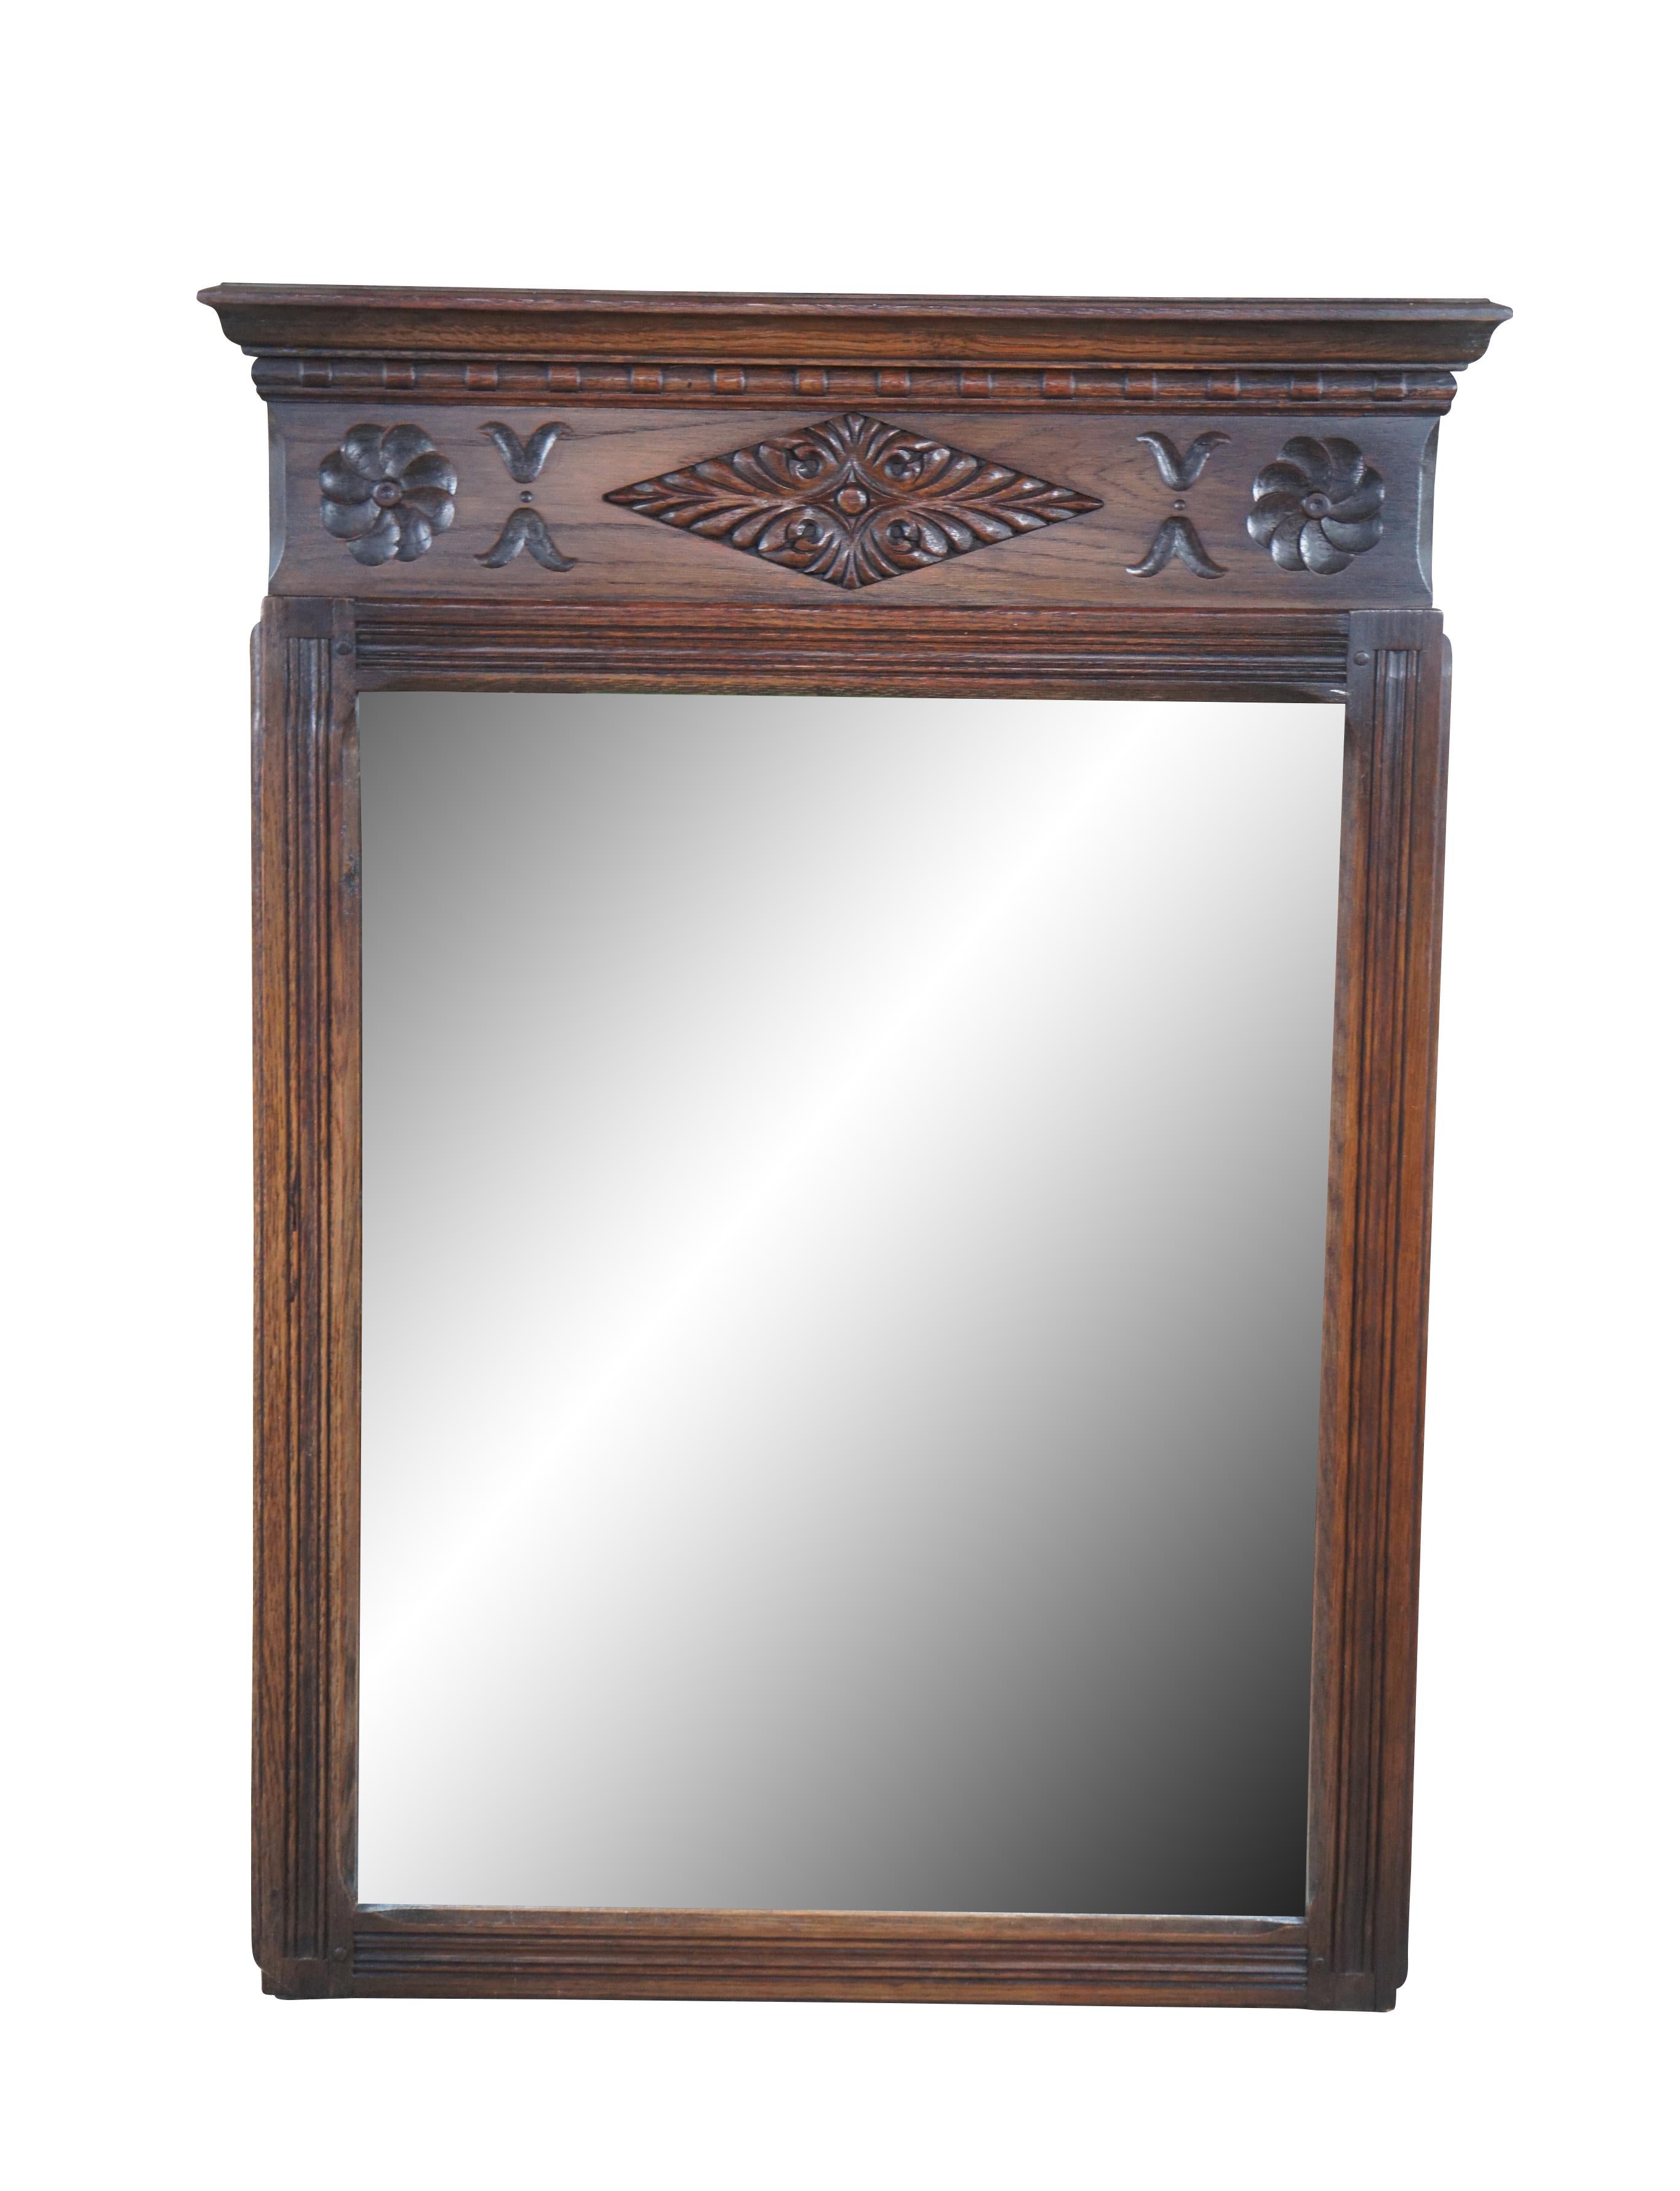 Spanish Revival mirror by Saginaw Furniture, circa late 1930s to early 40s. Made from oak with diamond pattern acanthus carved accents flanked by pinwheels.

Saginaw Furniture Shops, Inc. was founded in 1923 (incorporated January 19, 1928) by Lionel